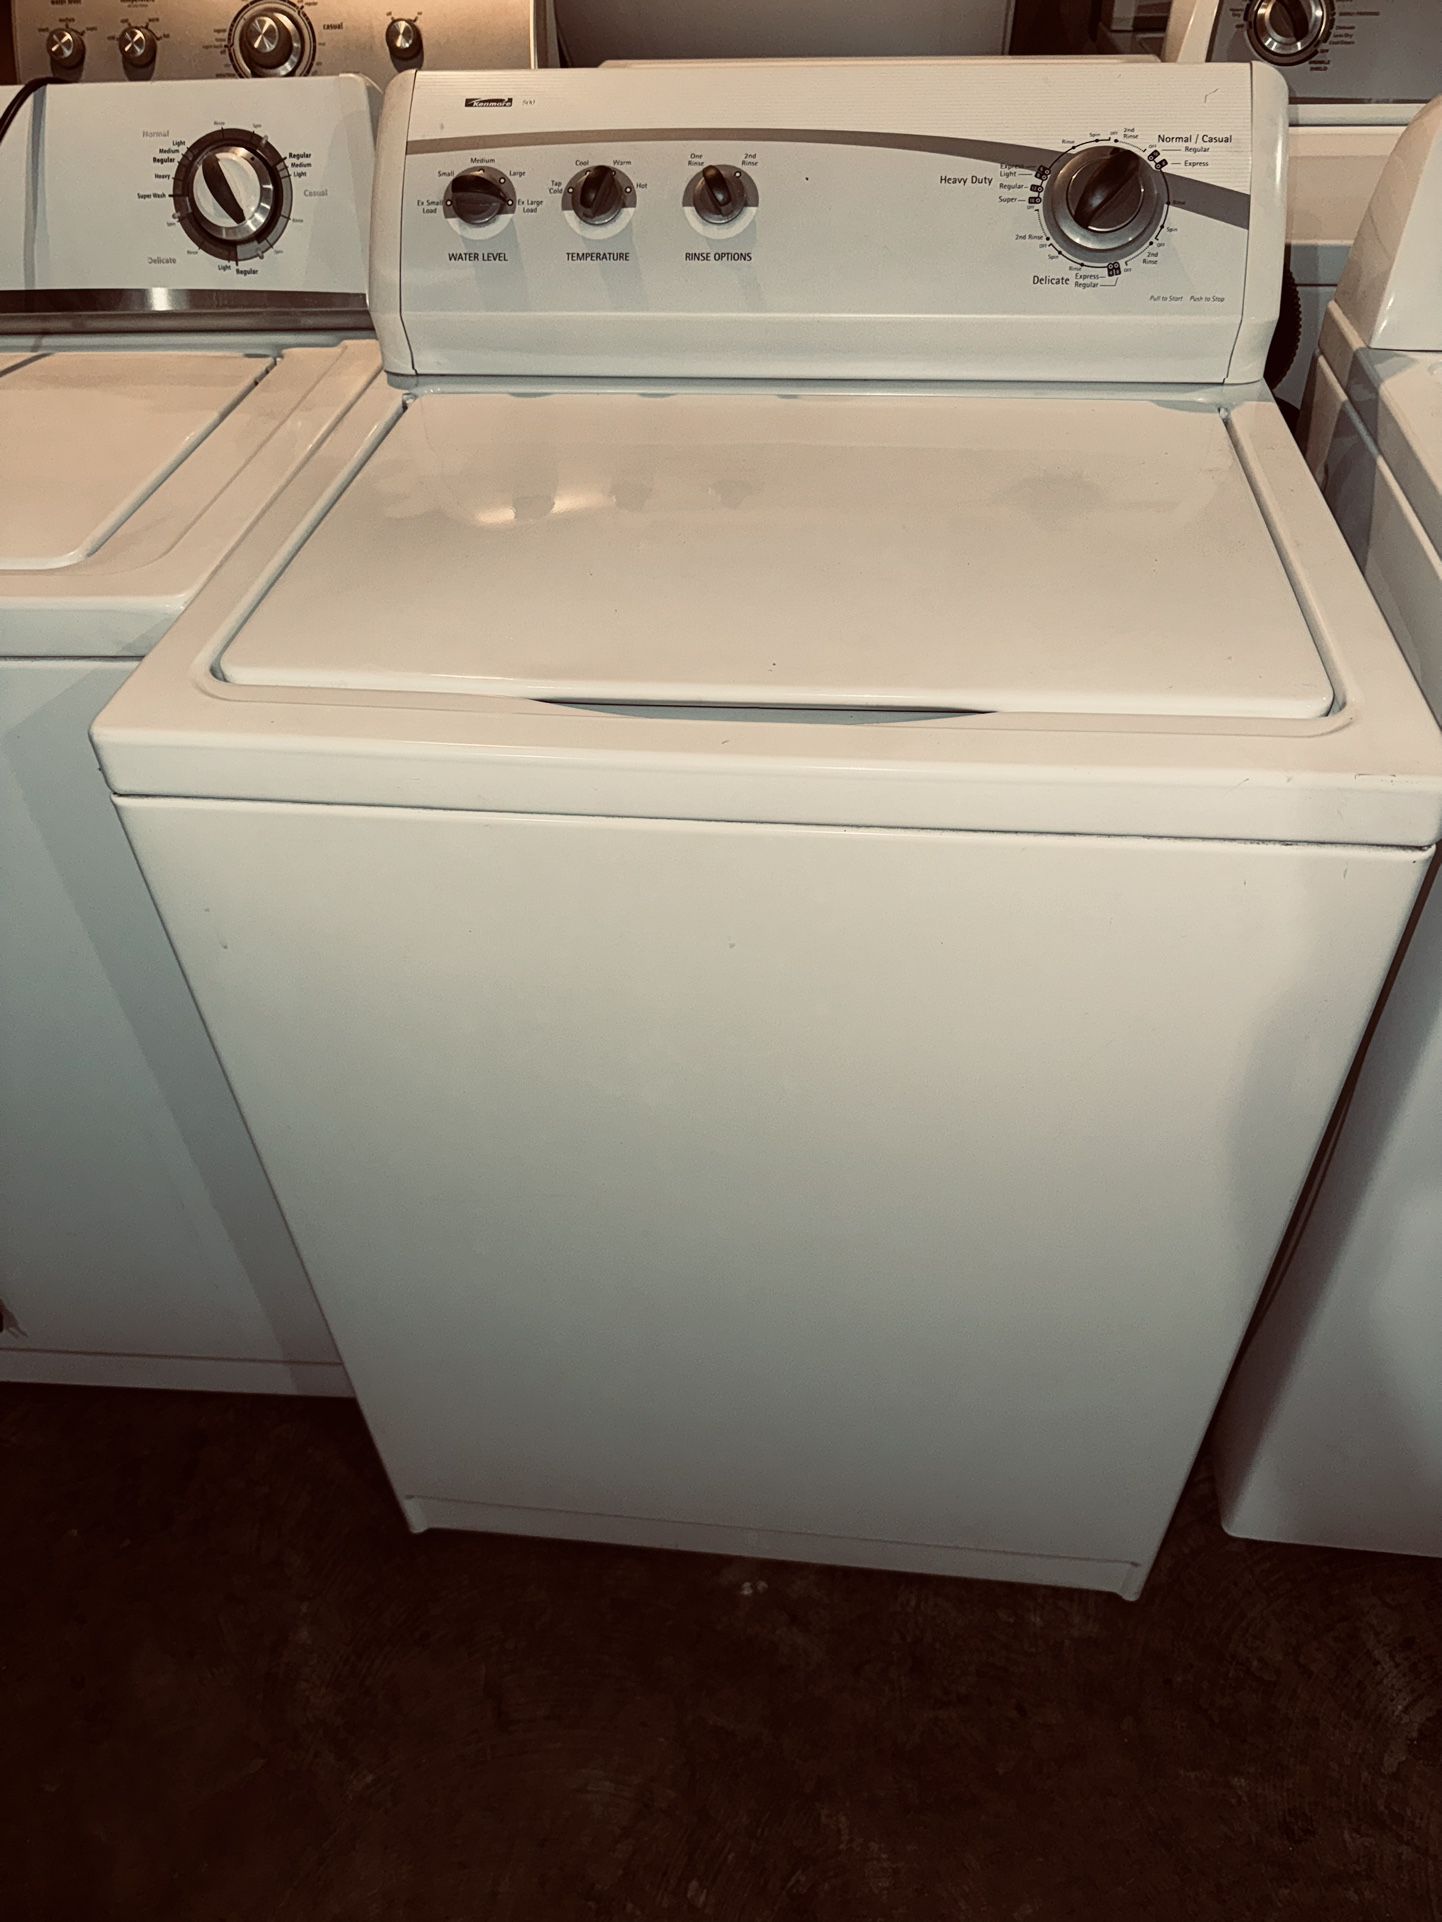 Kenmore Washer Works Perfec 3 Month Warranty We Deliver 